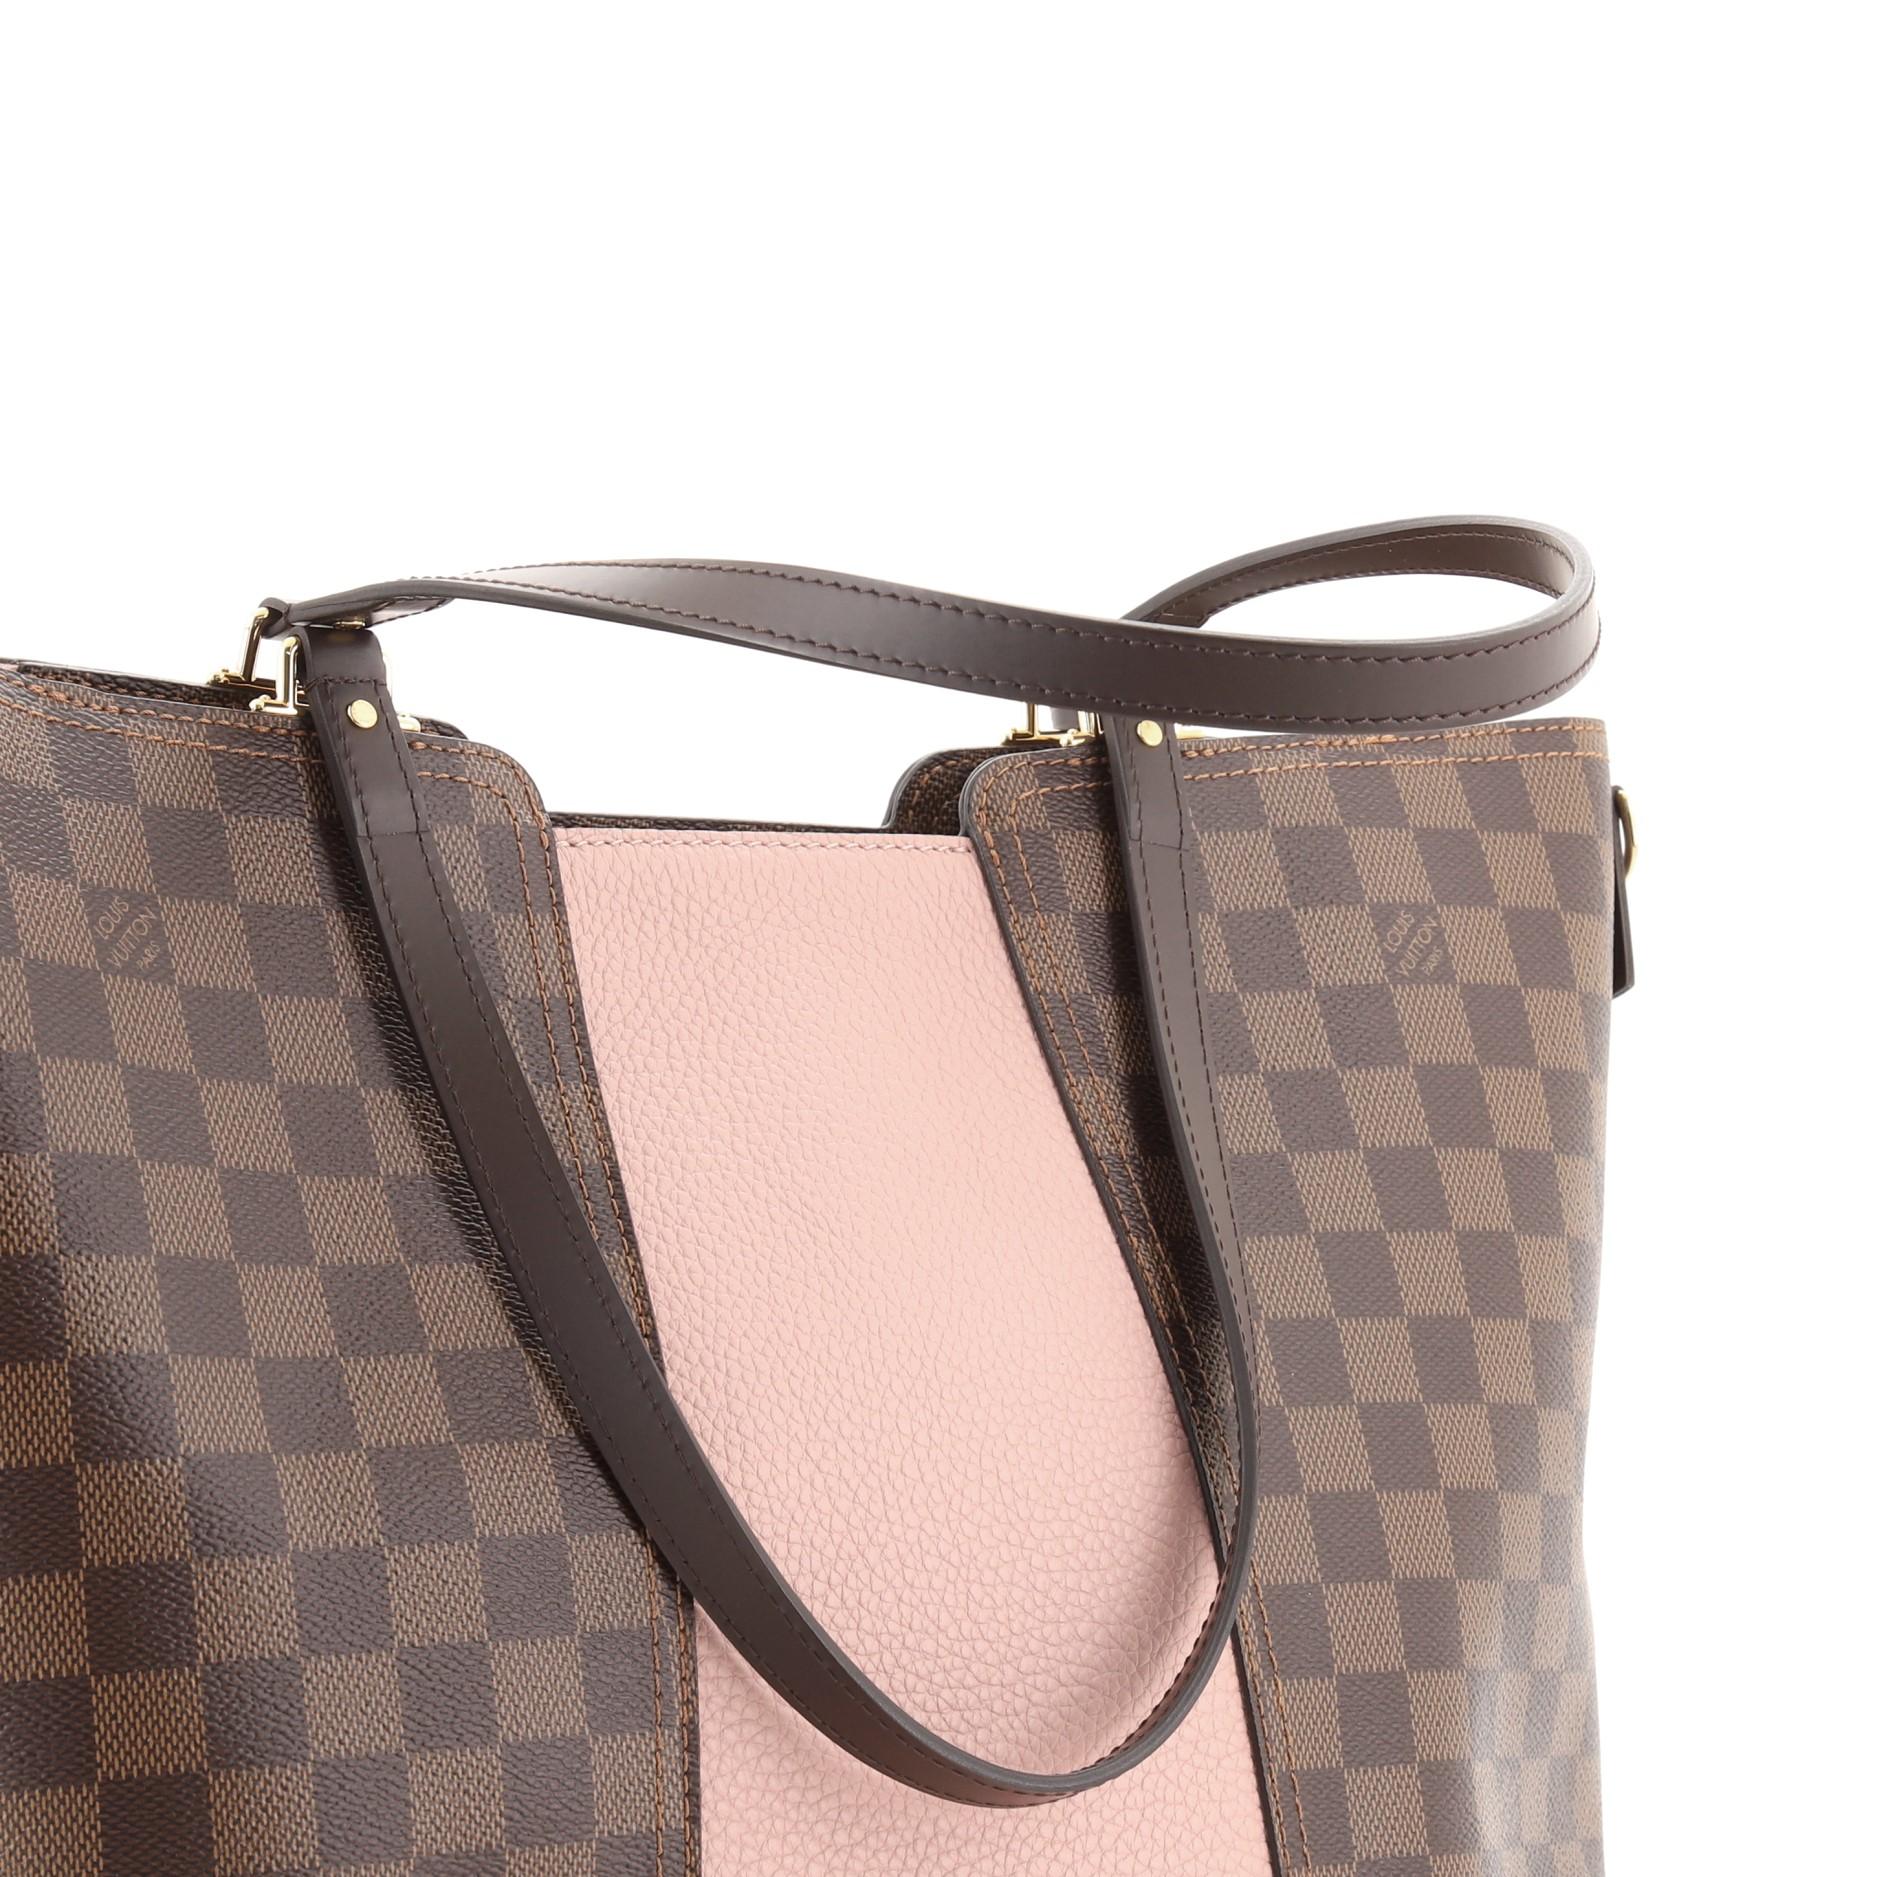 Gray Louis Vuitton Jersey Handbag Damier with Leather